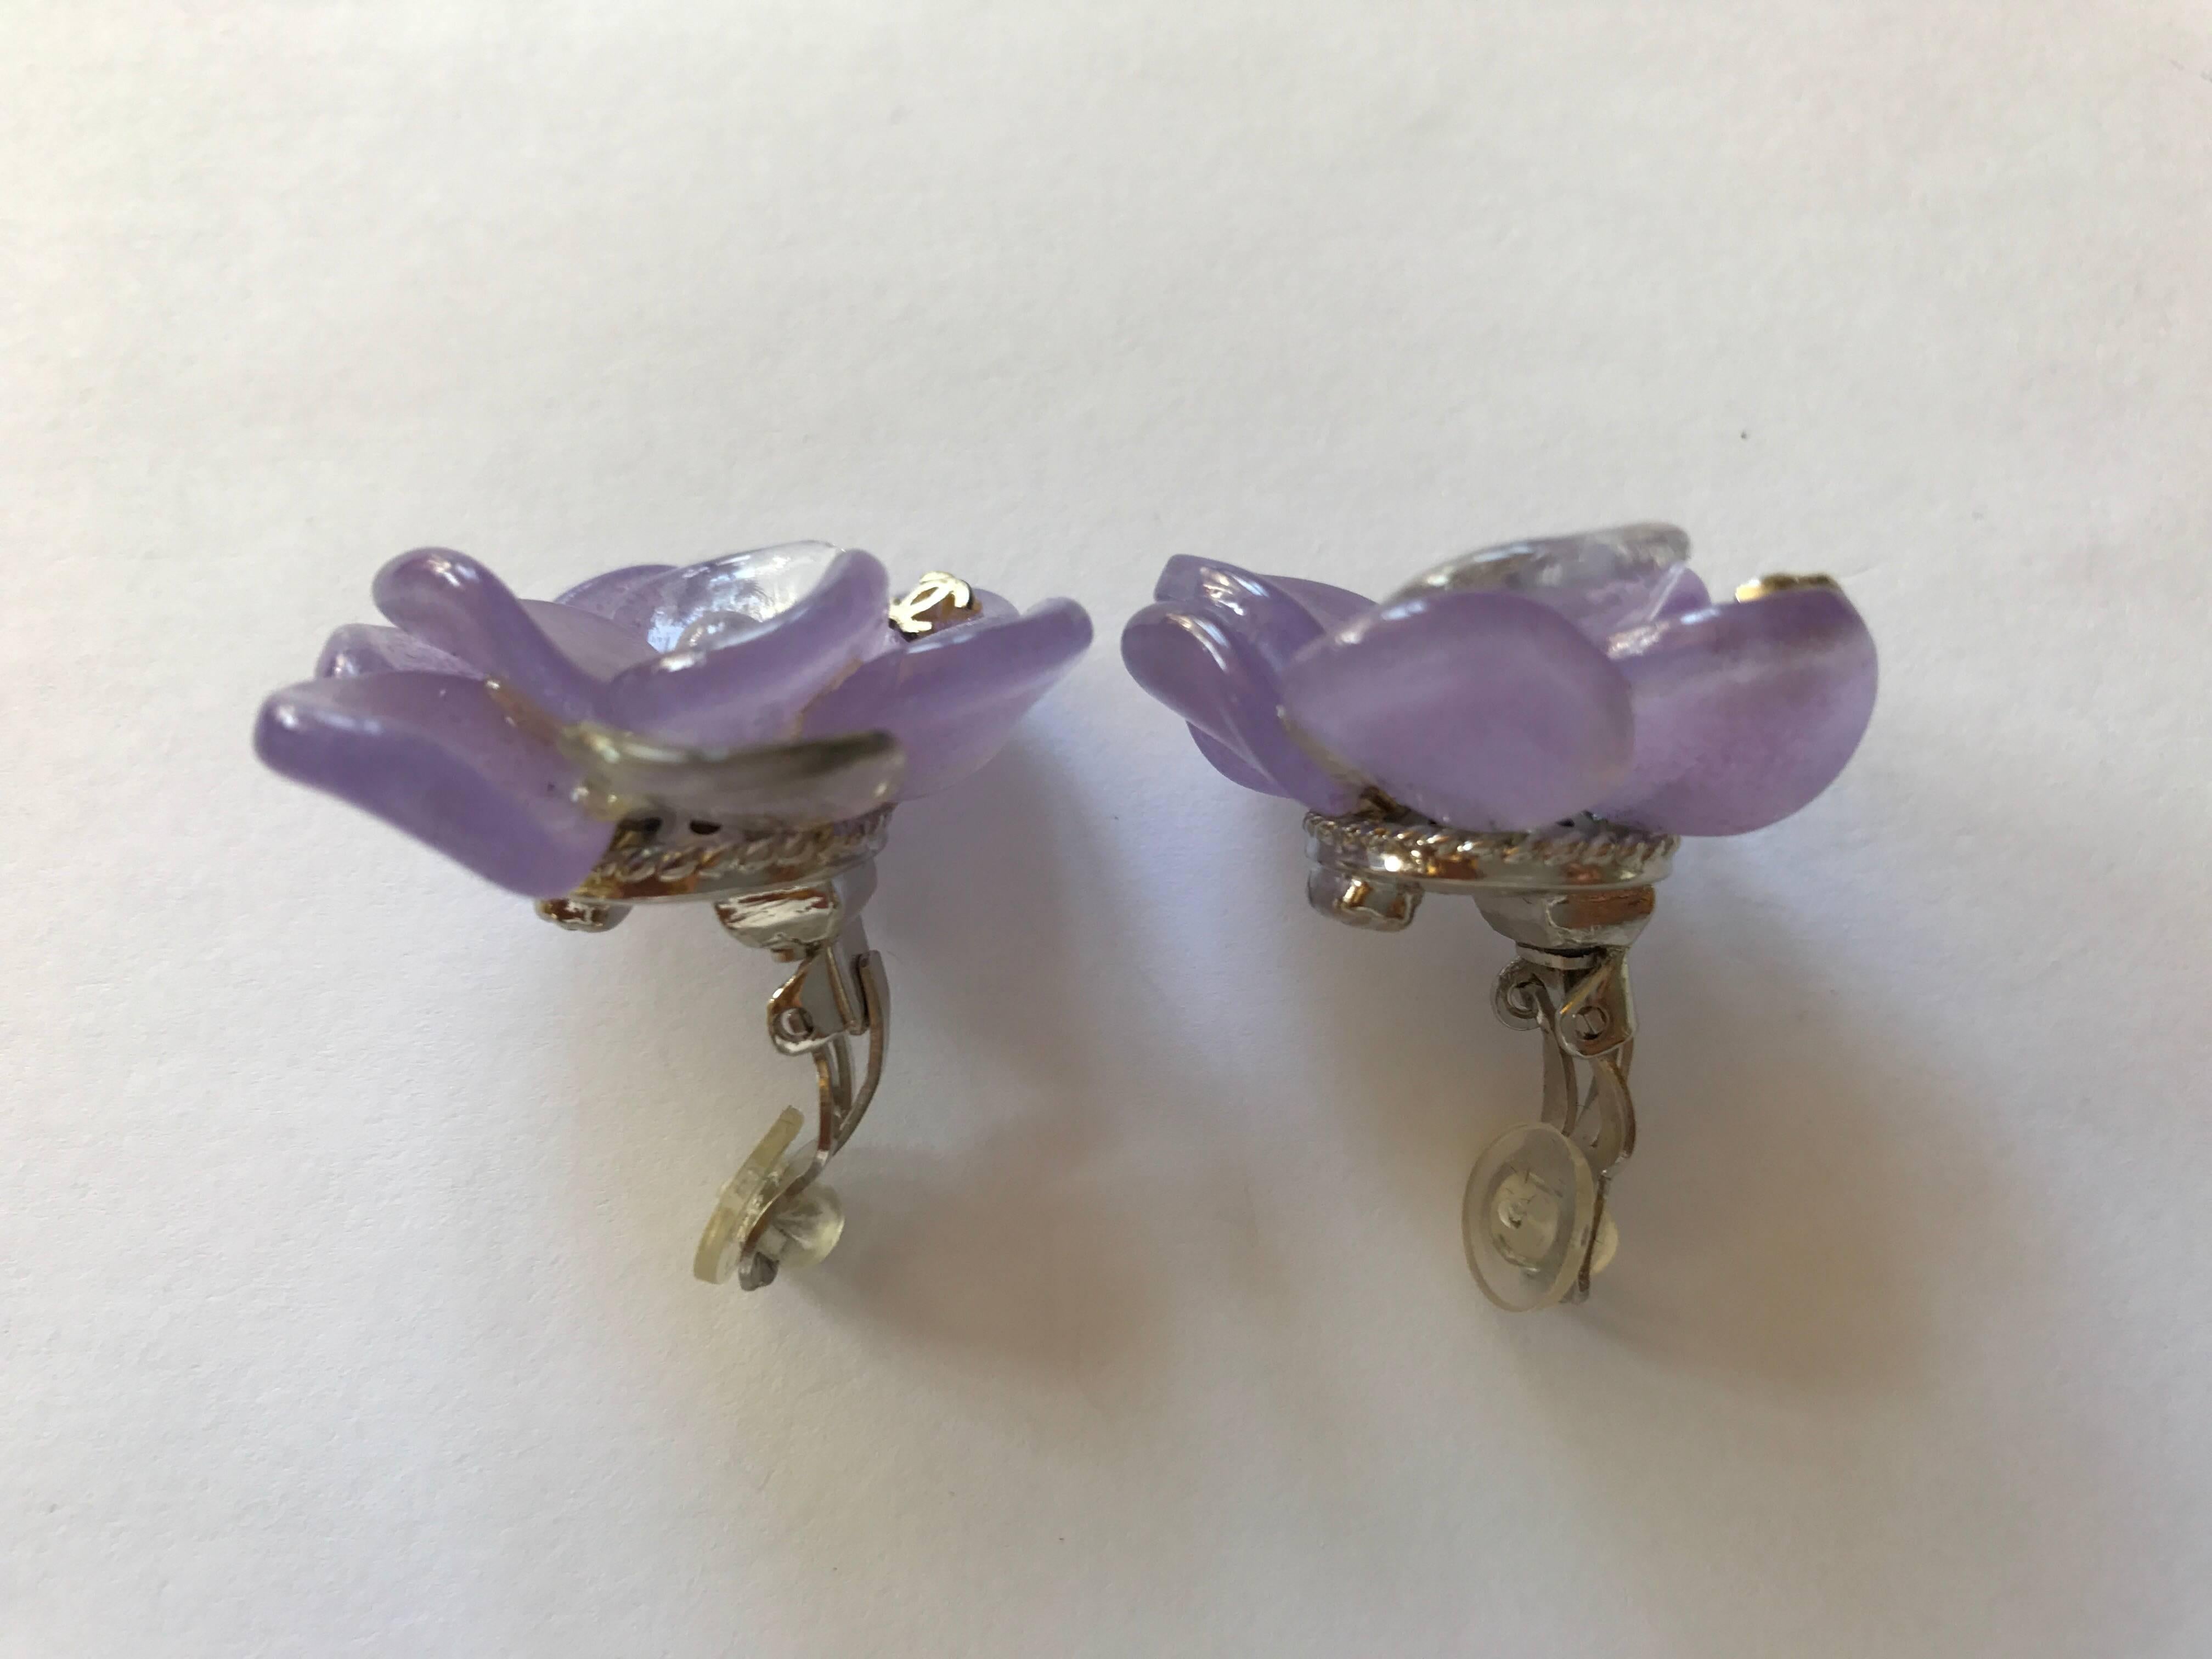 Chanel purple Gripoix camellia clip on earrings from the 2001 Spring collection with two small iconic silver CC.
The flower is composed of seven lavender petals and two clear ones. They are approximately 1.25 inches in diameter. They are brand new